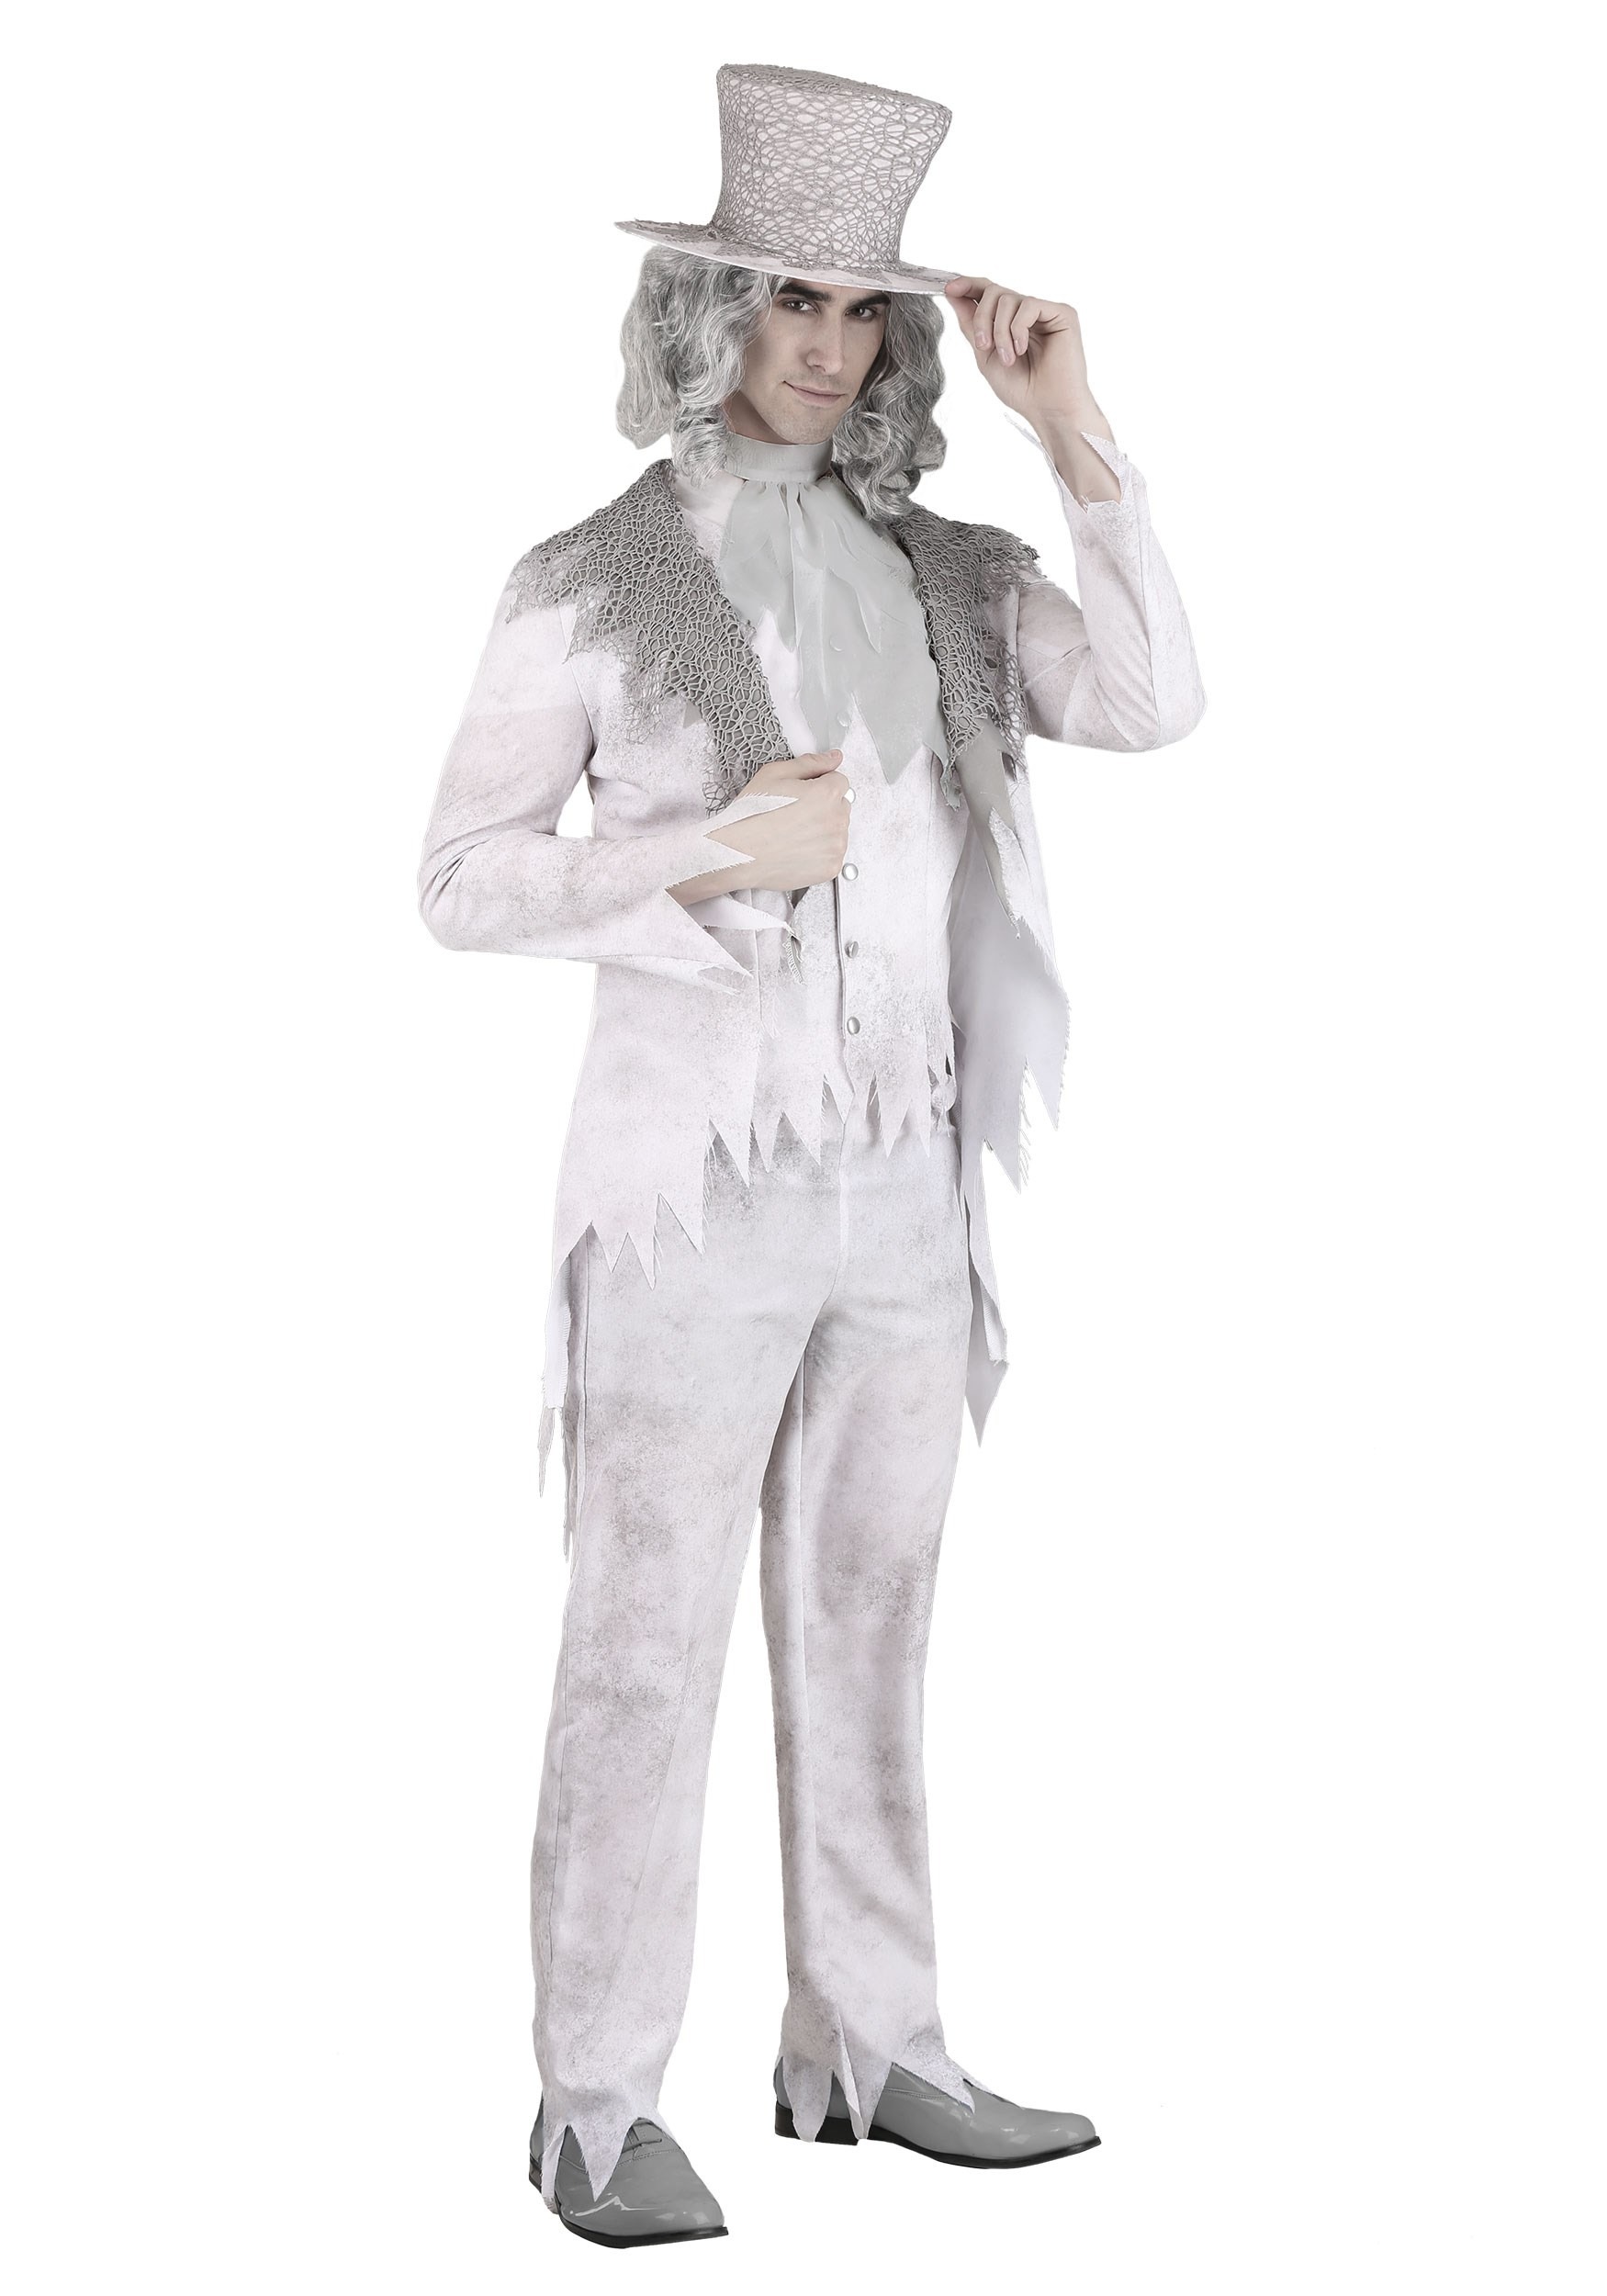 Photos - Fancy Dress GHOST FUN Costumes Victorian  Costume for Men Gray/White FUN1050AD 